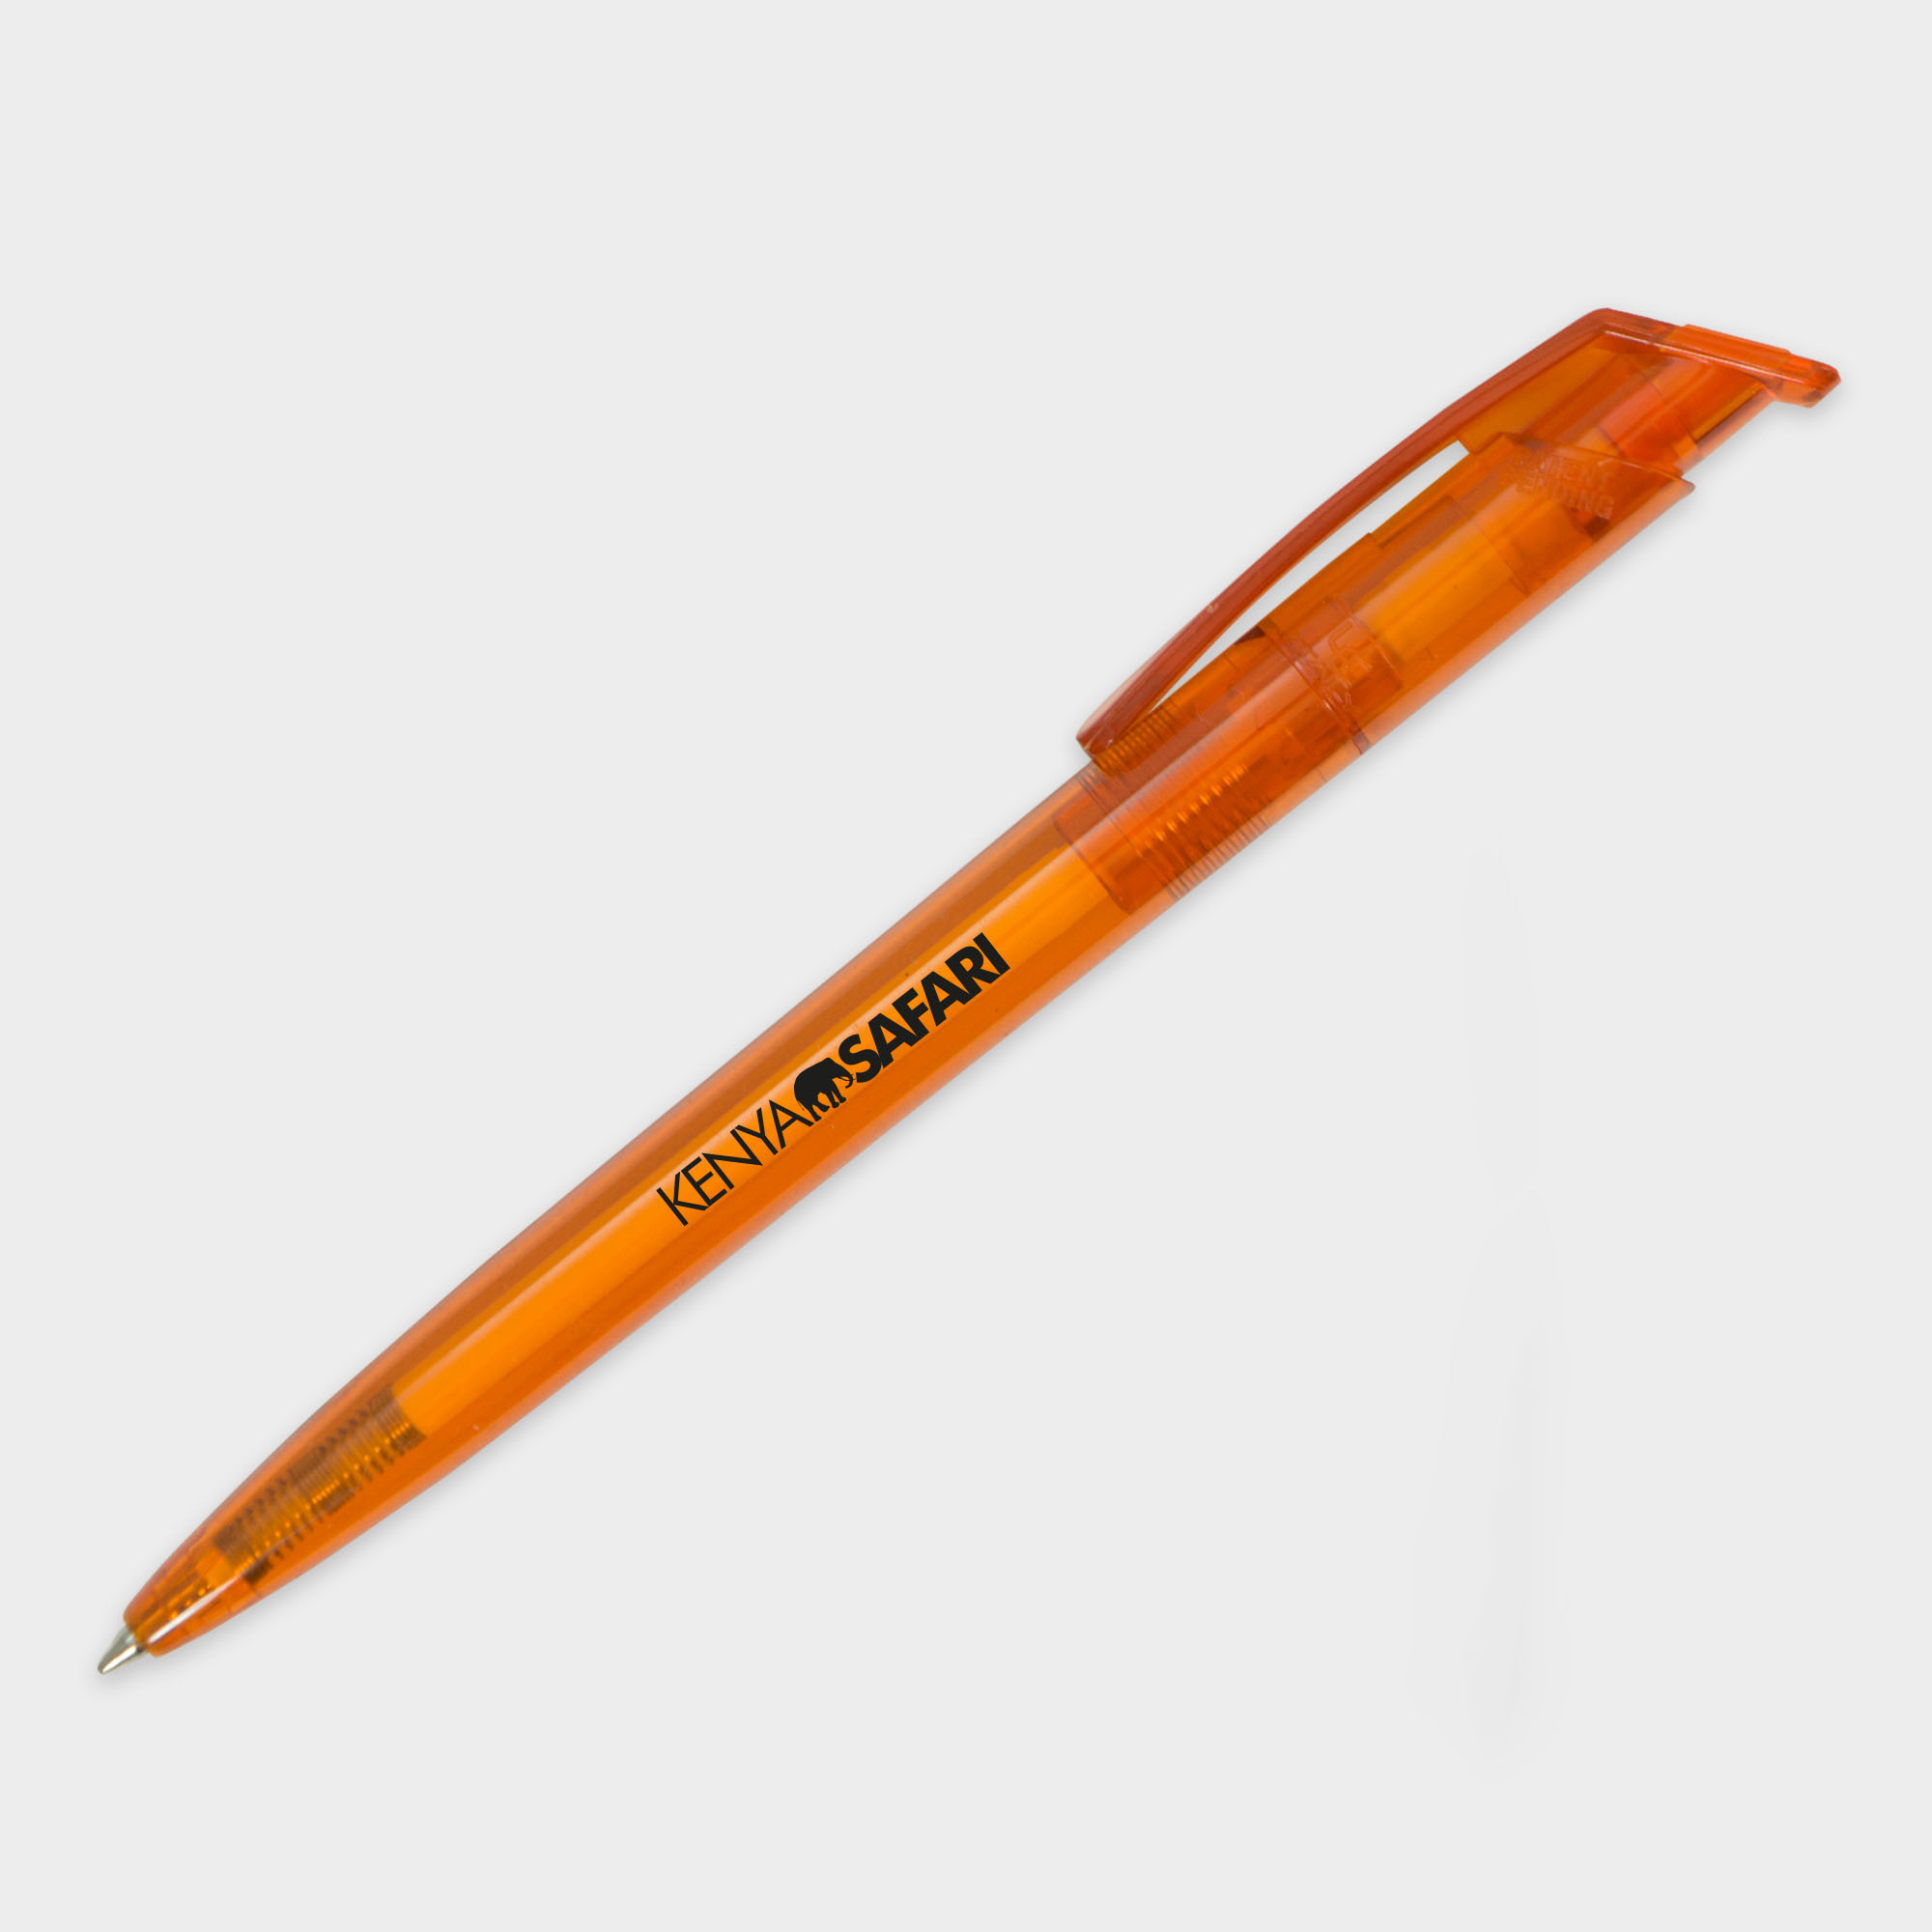 The Green & Good Litani Pen. An eco-friendly and high-quality pen made from recycled plastic bottles (rPET) with black ink refills and a frosted body. Made in the EU and available in a variety of colours. Orange